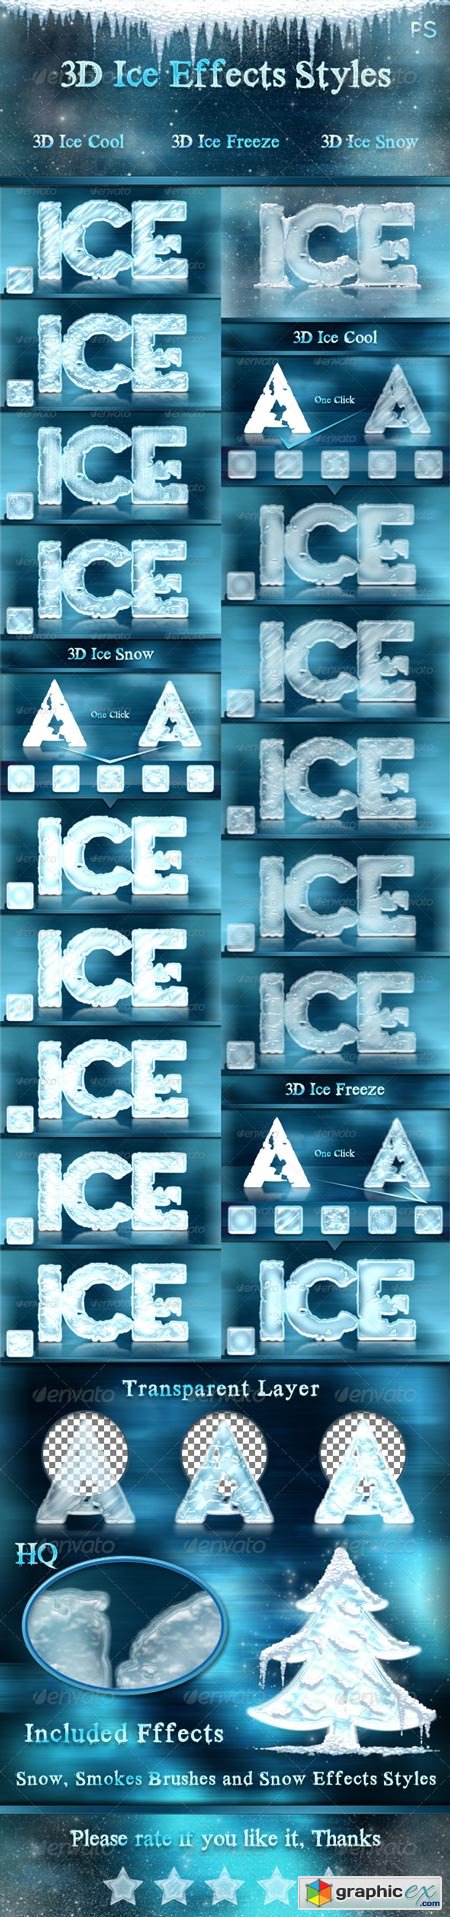 3D Ice Cool, Freeze & Snow Effects Styles 6500617